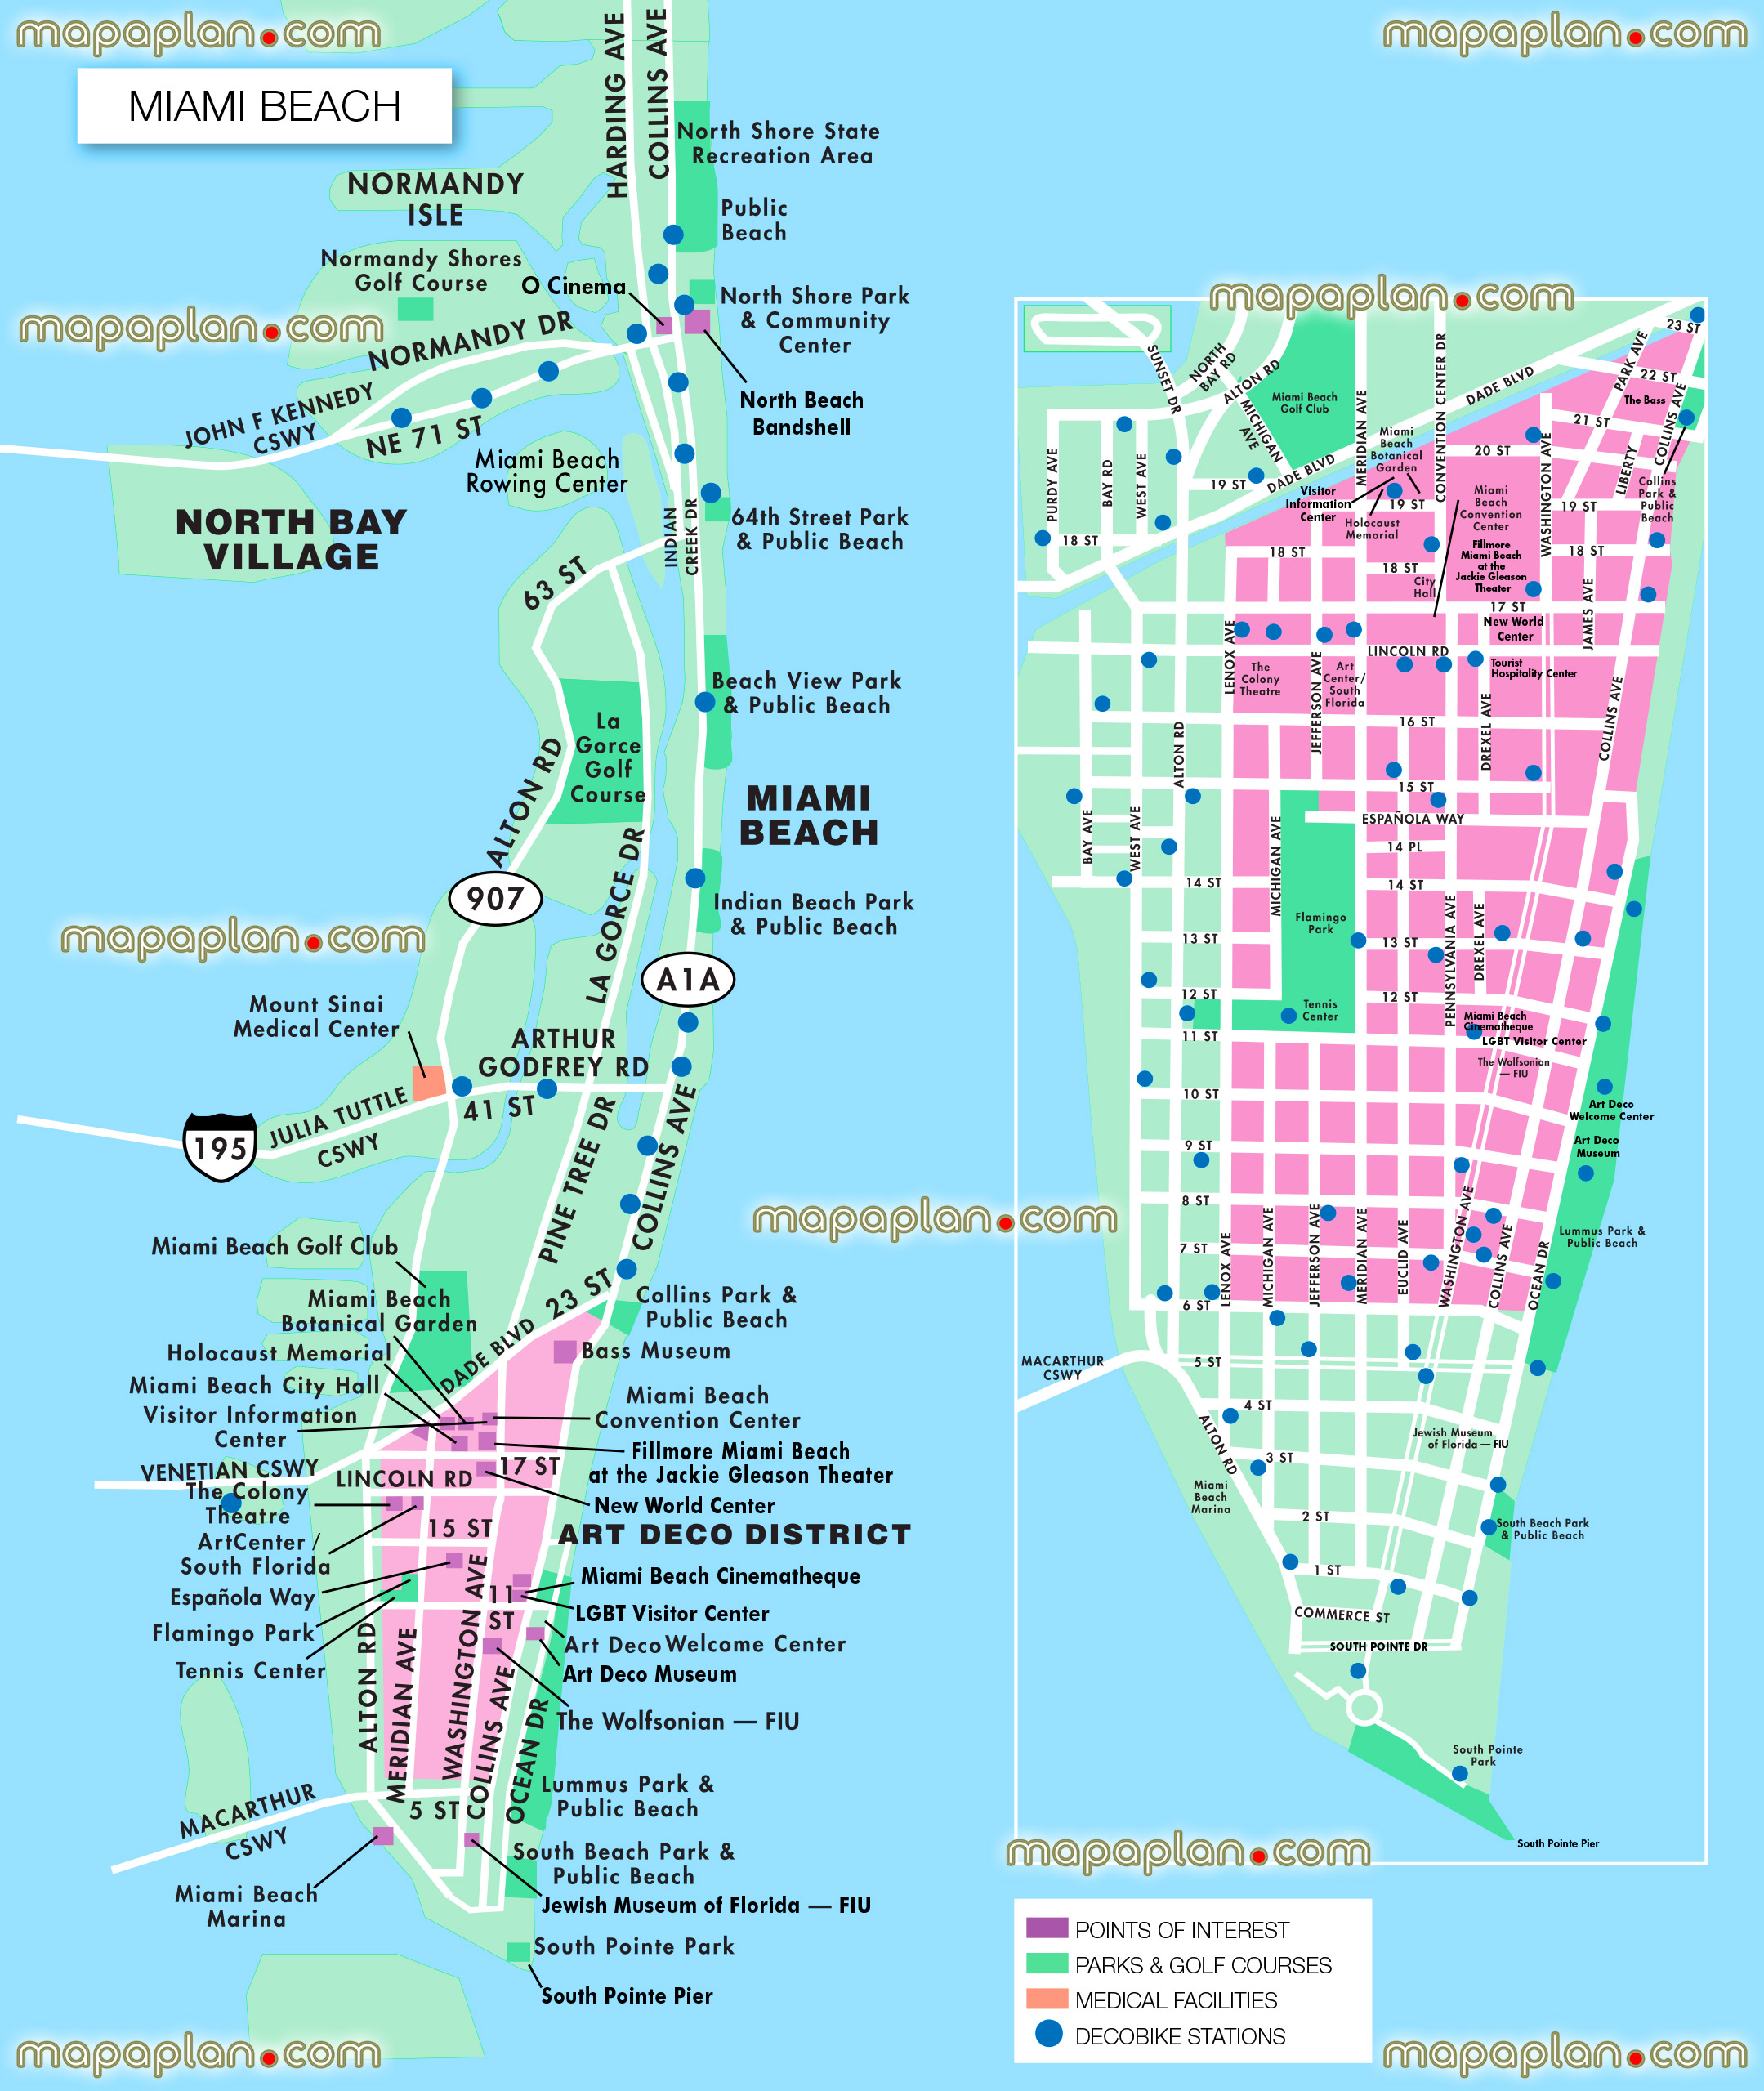 Miami south beach usa virtual interactive 3d detailed city center free printable visitors detailed tourist guide download inner old new town buildings must see sights sightseeing places interest best museums art galleries shopping